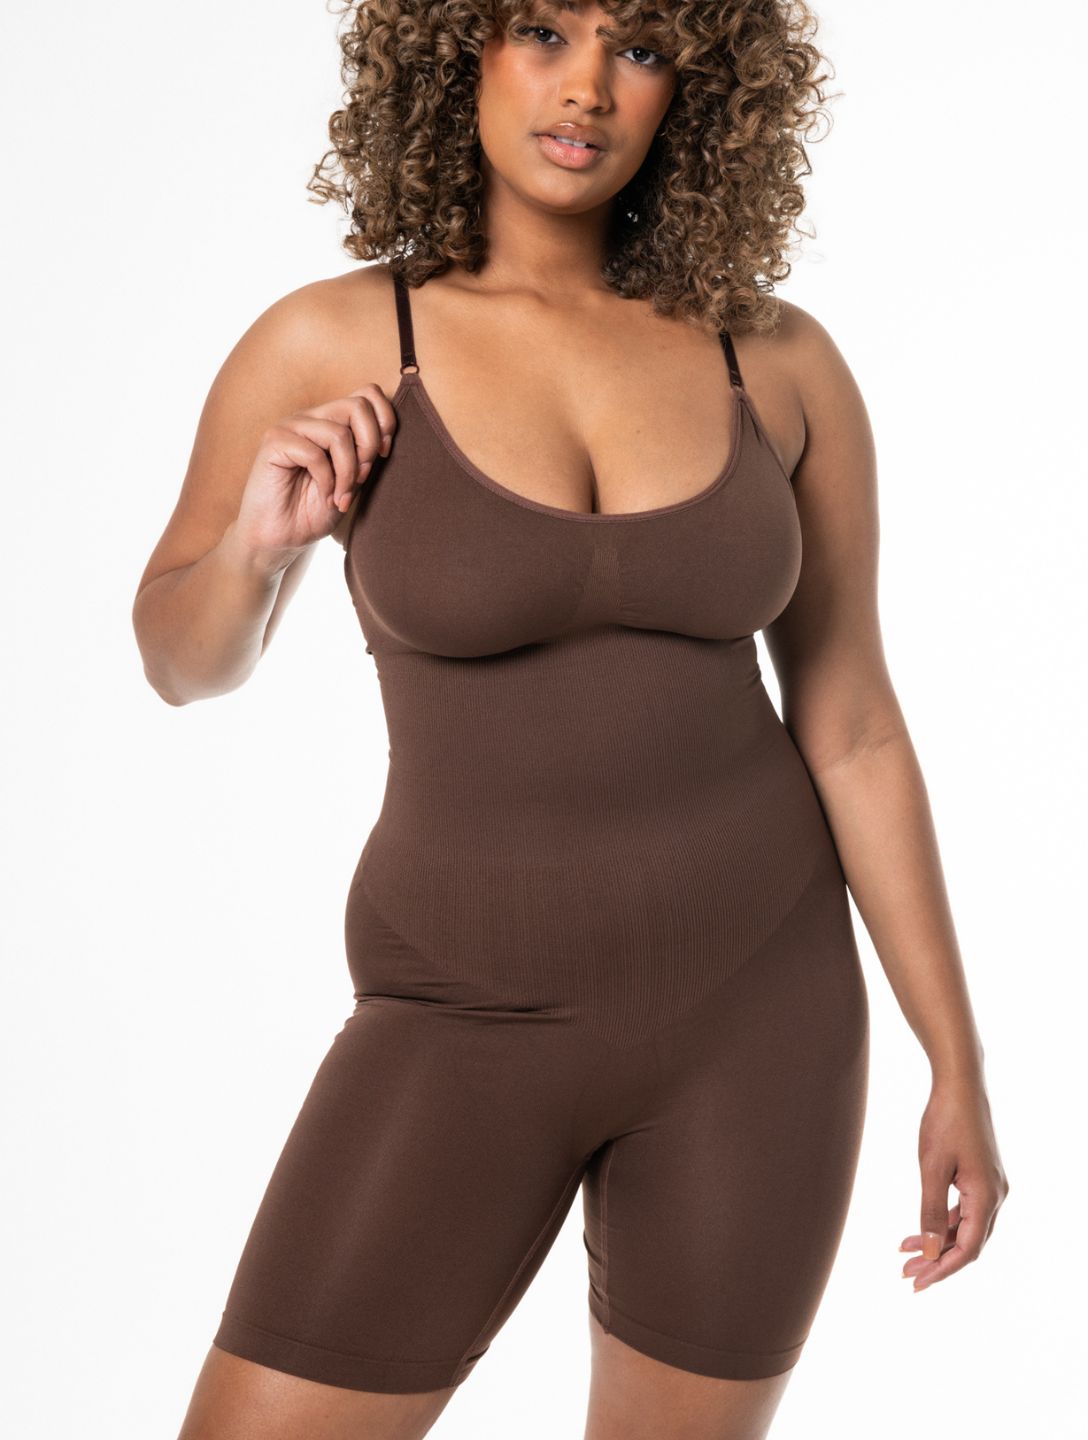 the long awaited hey shape redepemption! $50 well spent or down the dr, bodysuit